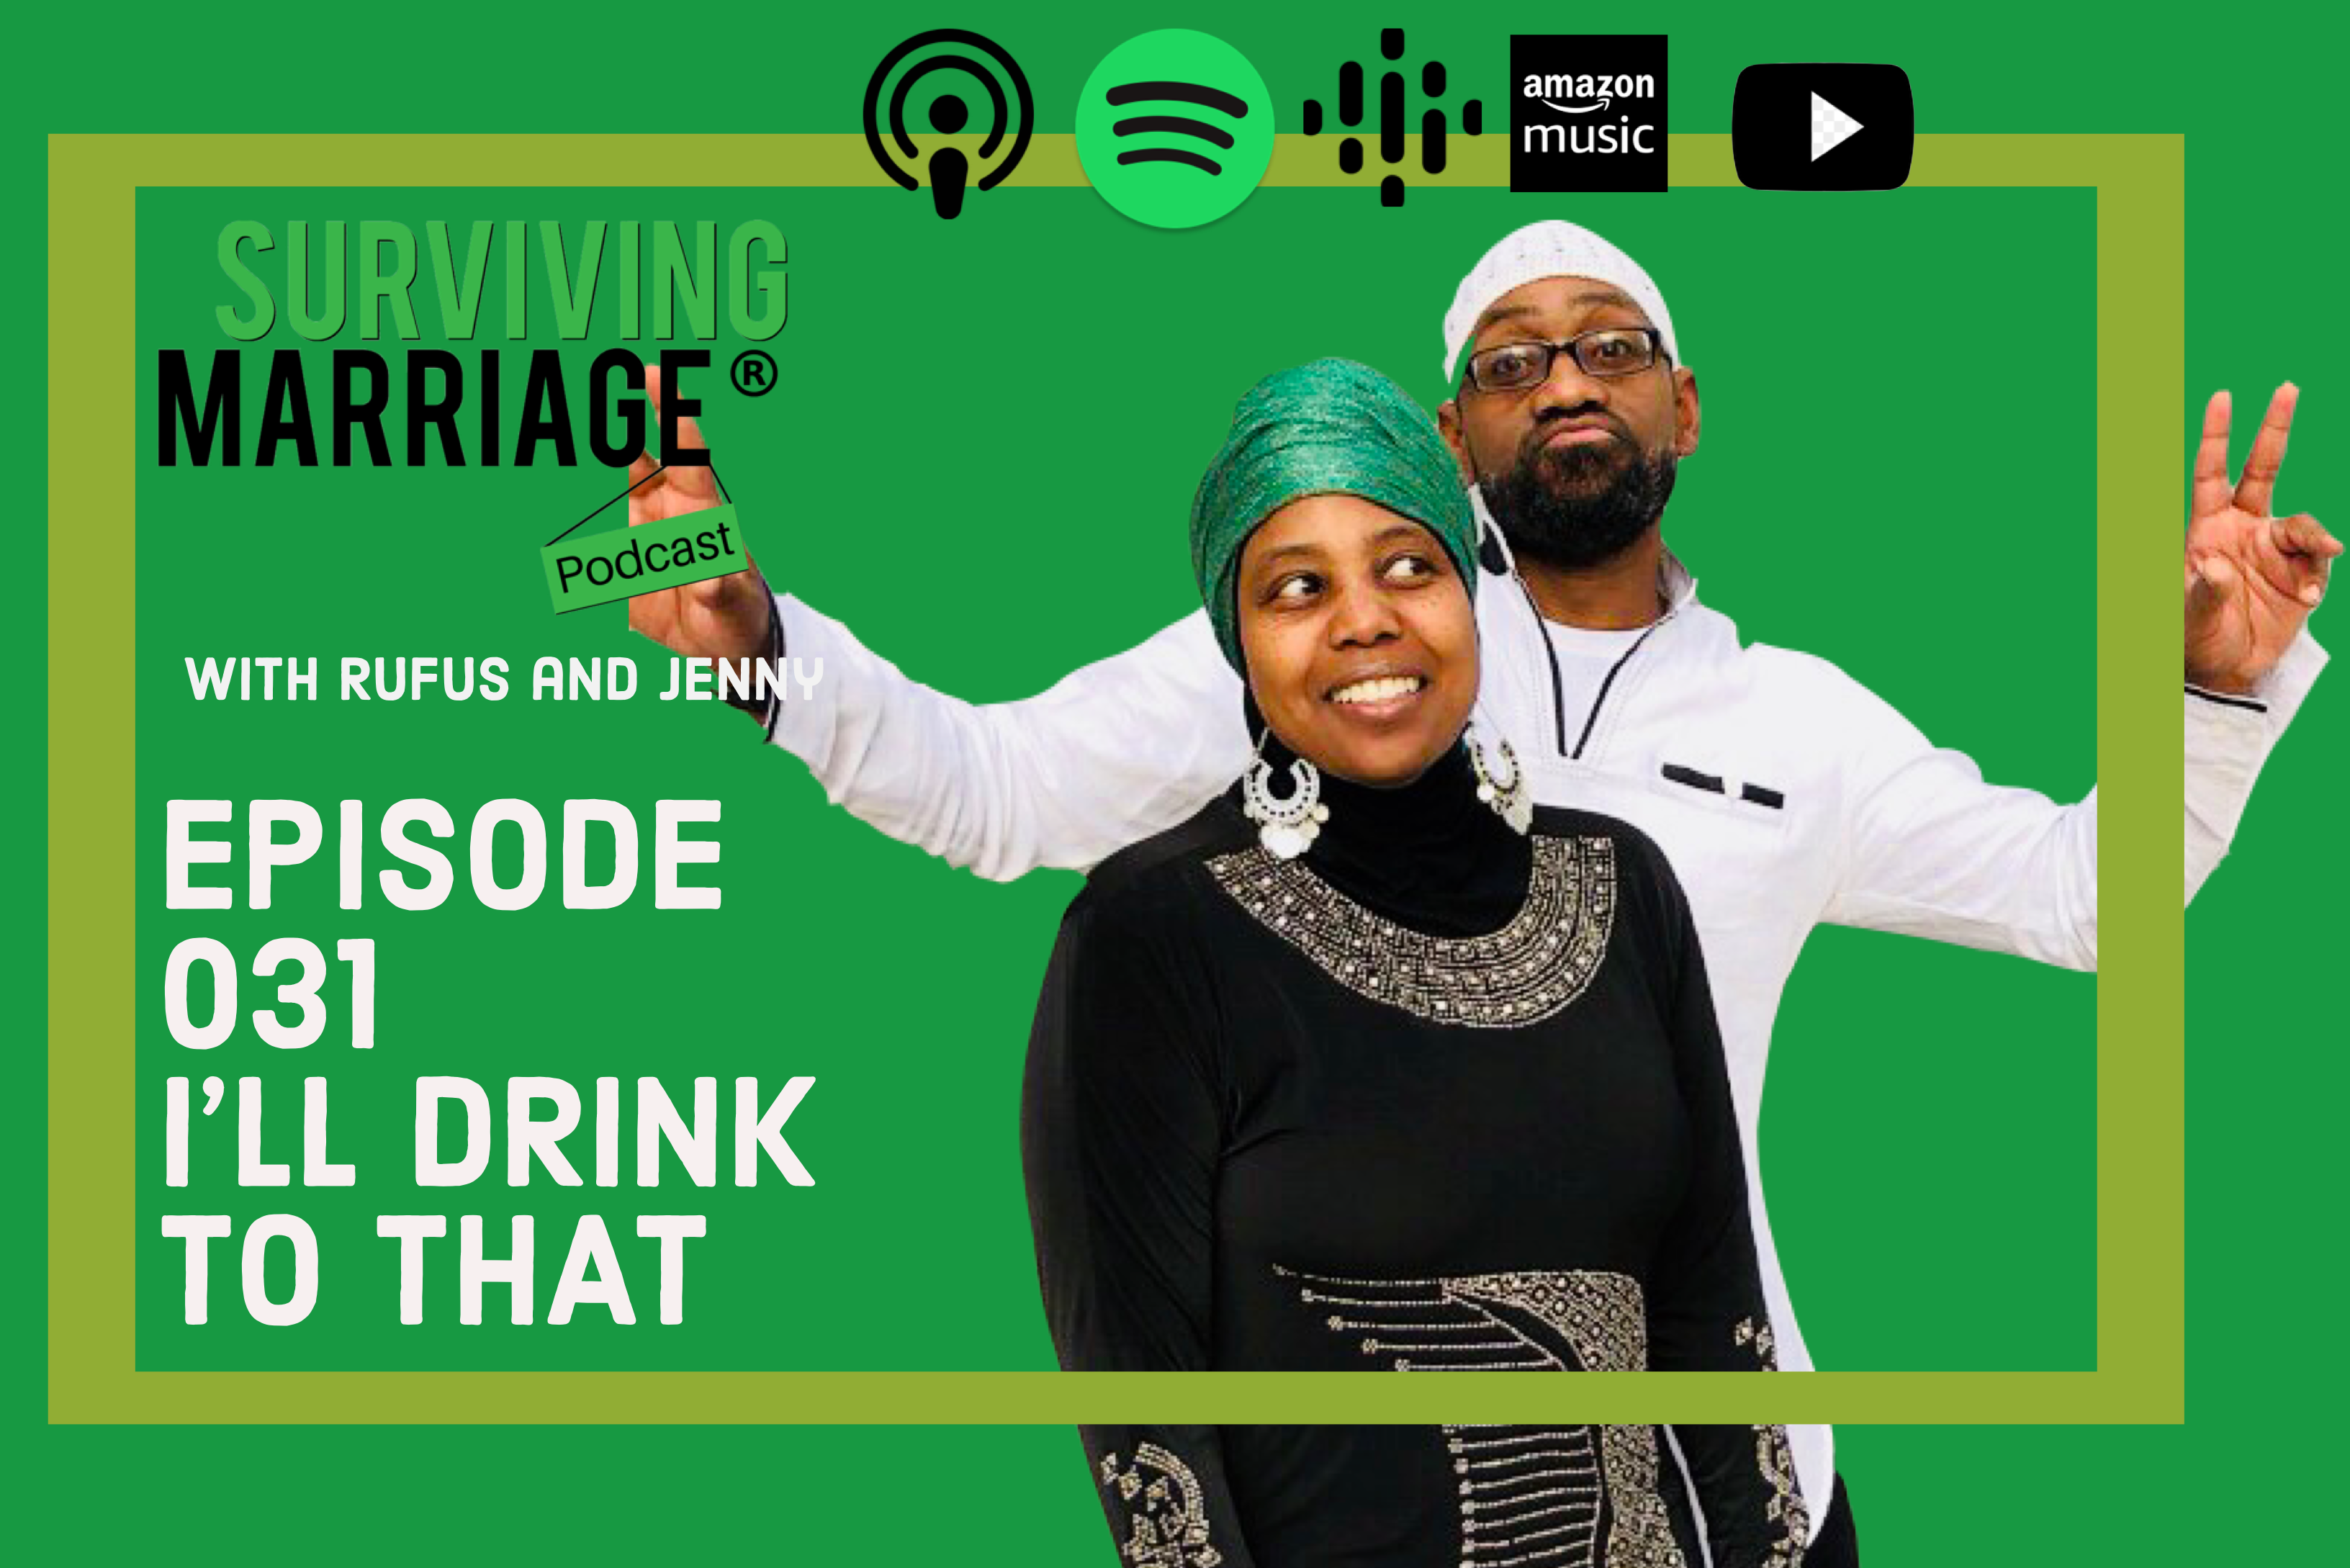 #SurvivingMarriage – I’ll Drink to That